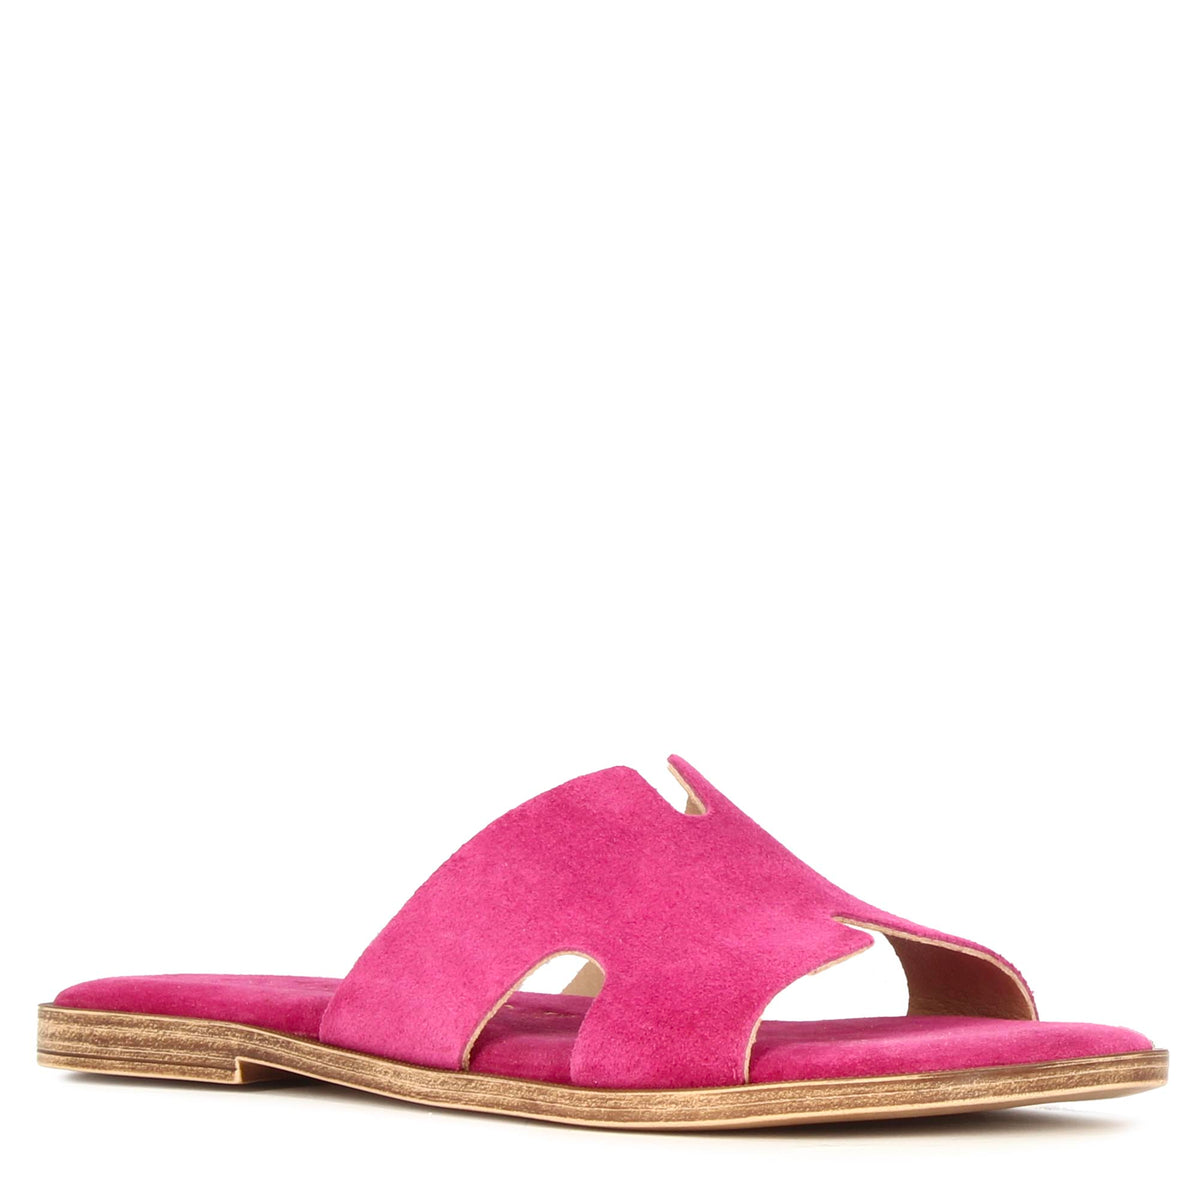 Women's slippers in pink suede leather